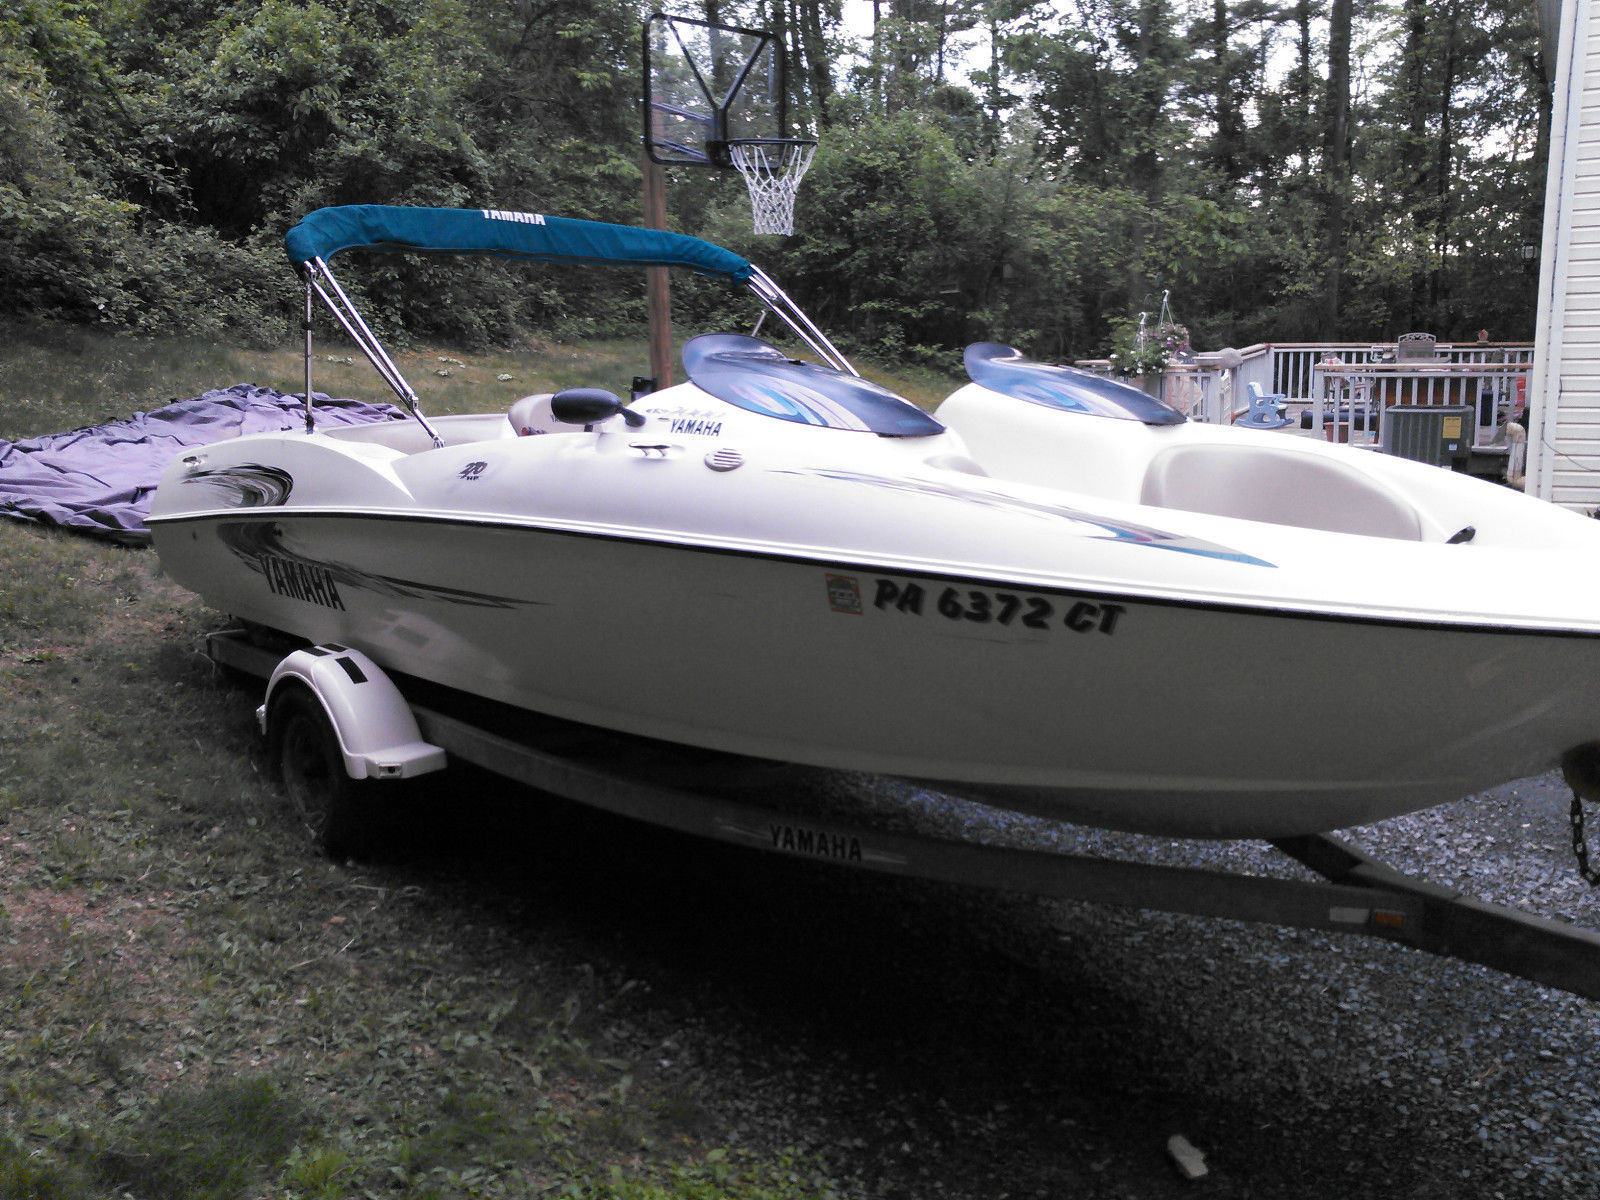 LS2000 Yamaha Jet Boat 2000 for sale for $7,750 - Boats-from-USA.com